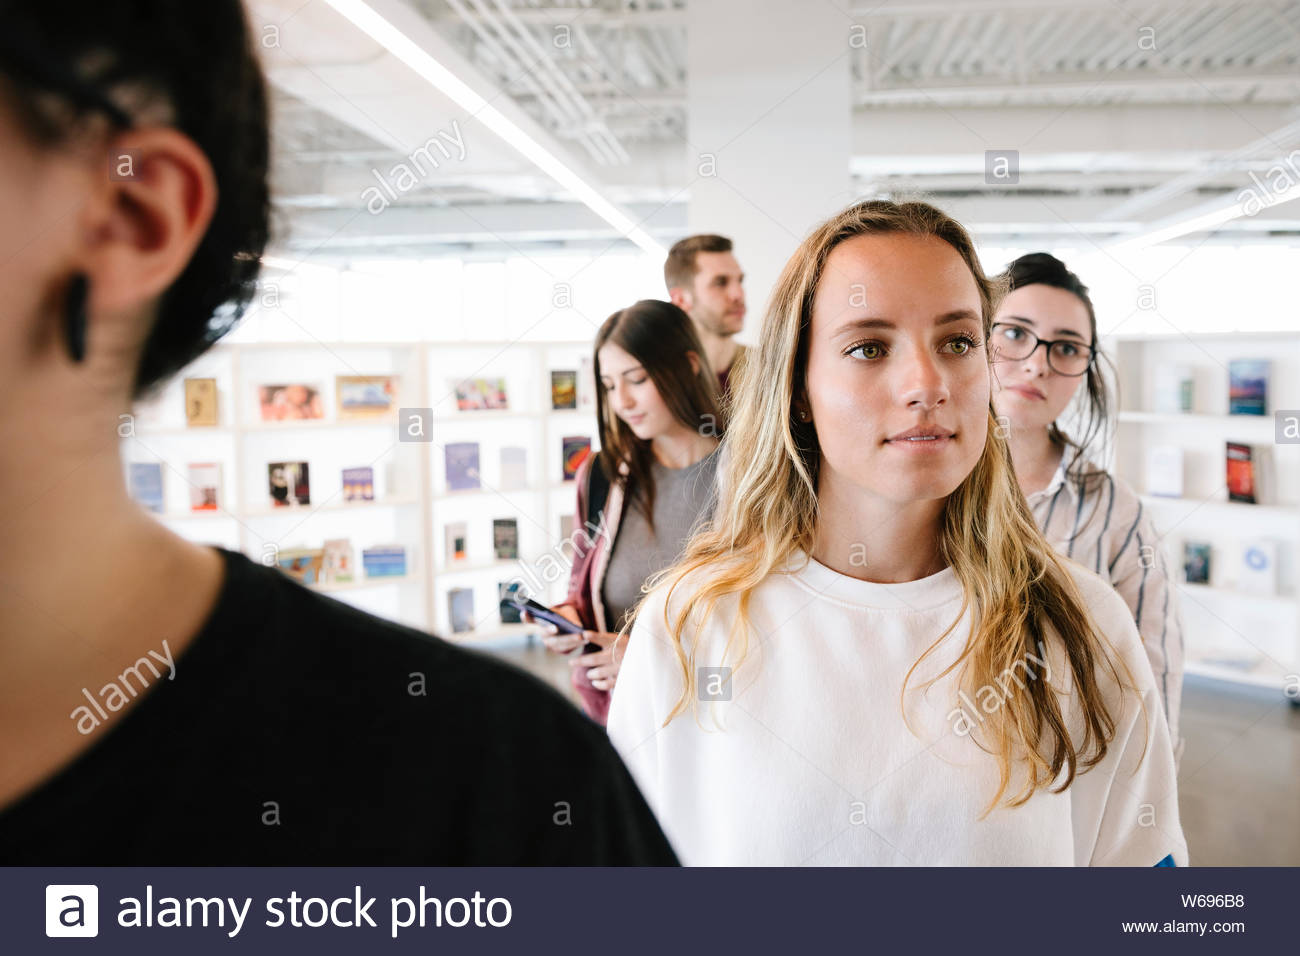 Student in a line using smartphone in university library Stock Photo